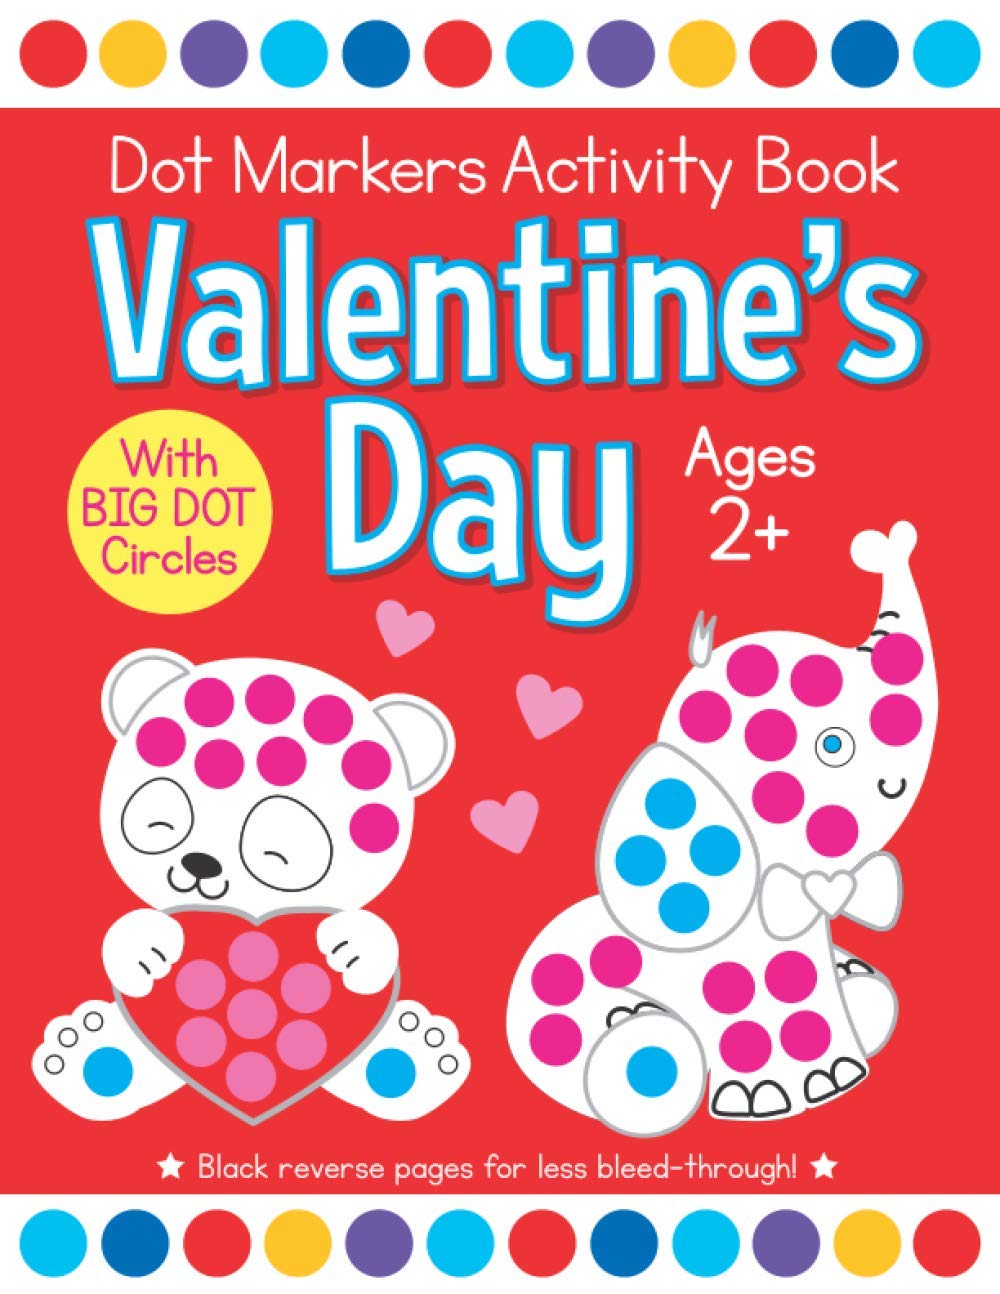 Valentine's Day Dot Markers Activity Book for Ages 2+: Easy Big Dots for Toddler and Preschool Kids Paint Dauber Coloring (Valentine's Day Dot Marker